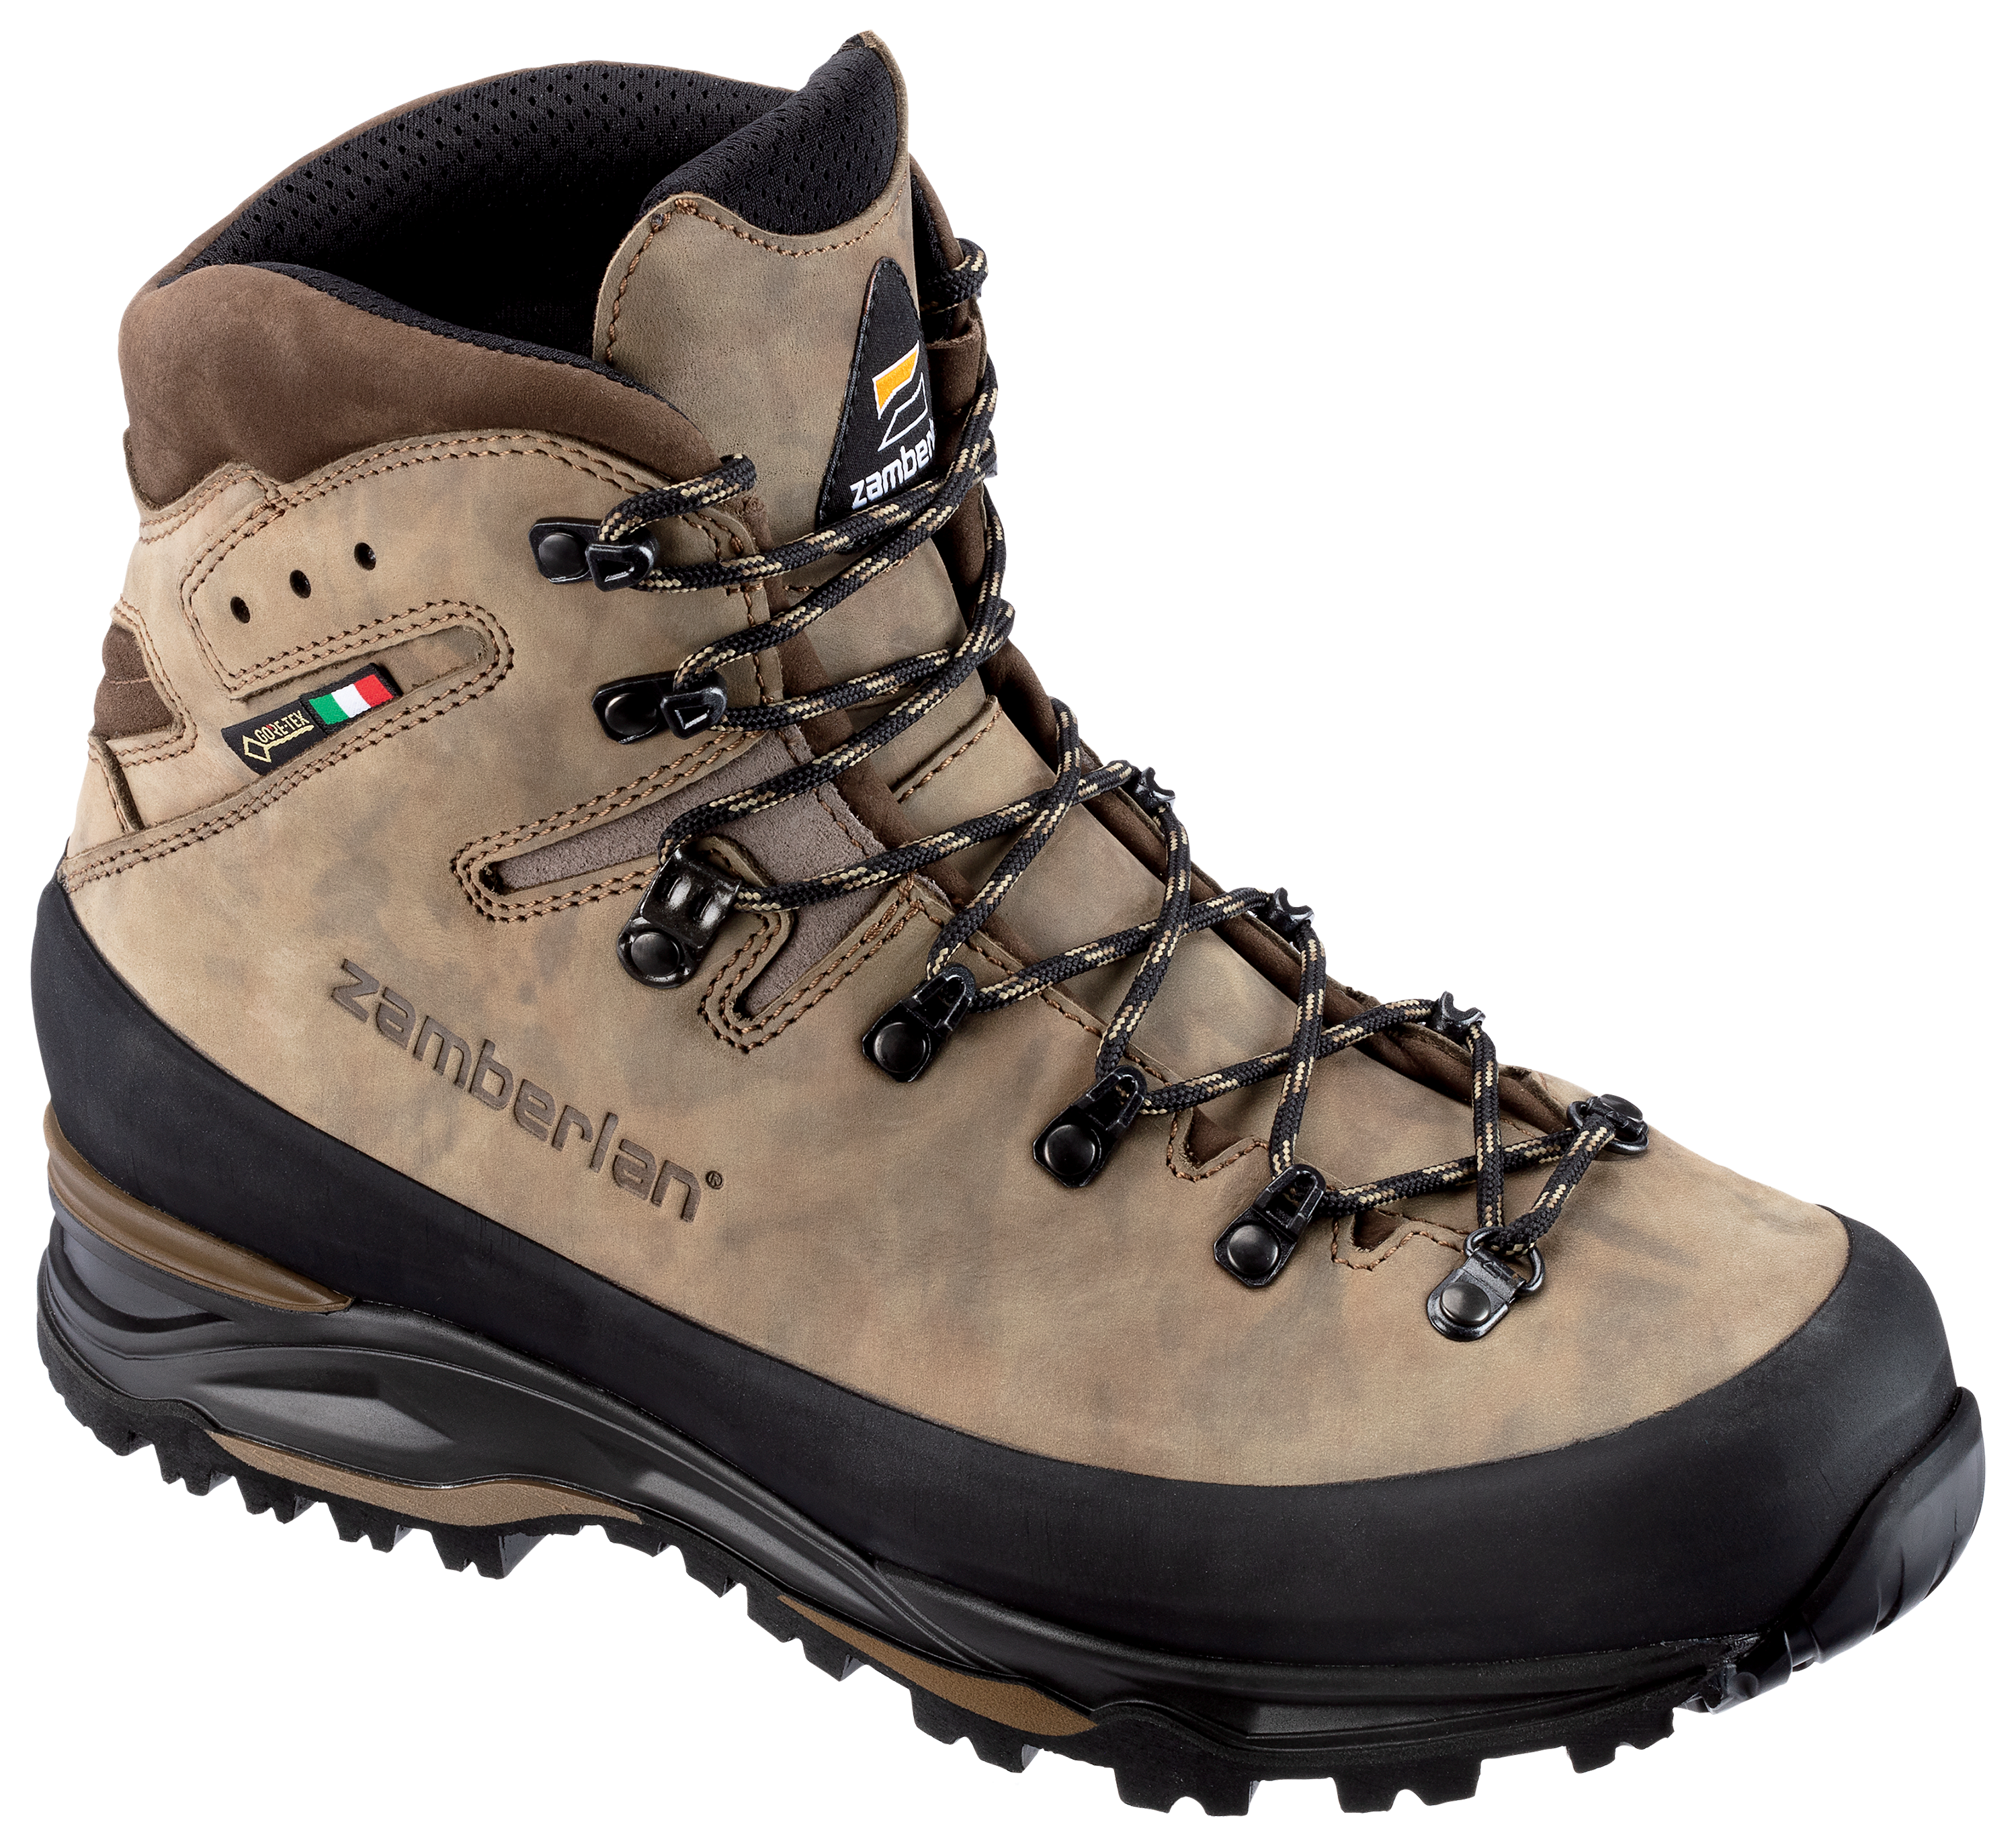 Zamberlan 960 Guide GORE-TEX RR Hunting Boots for Men